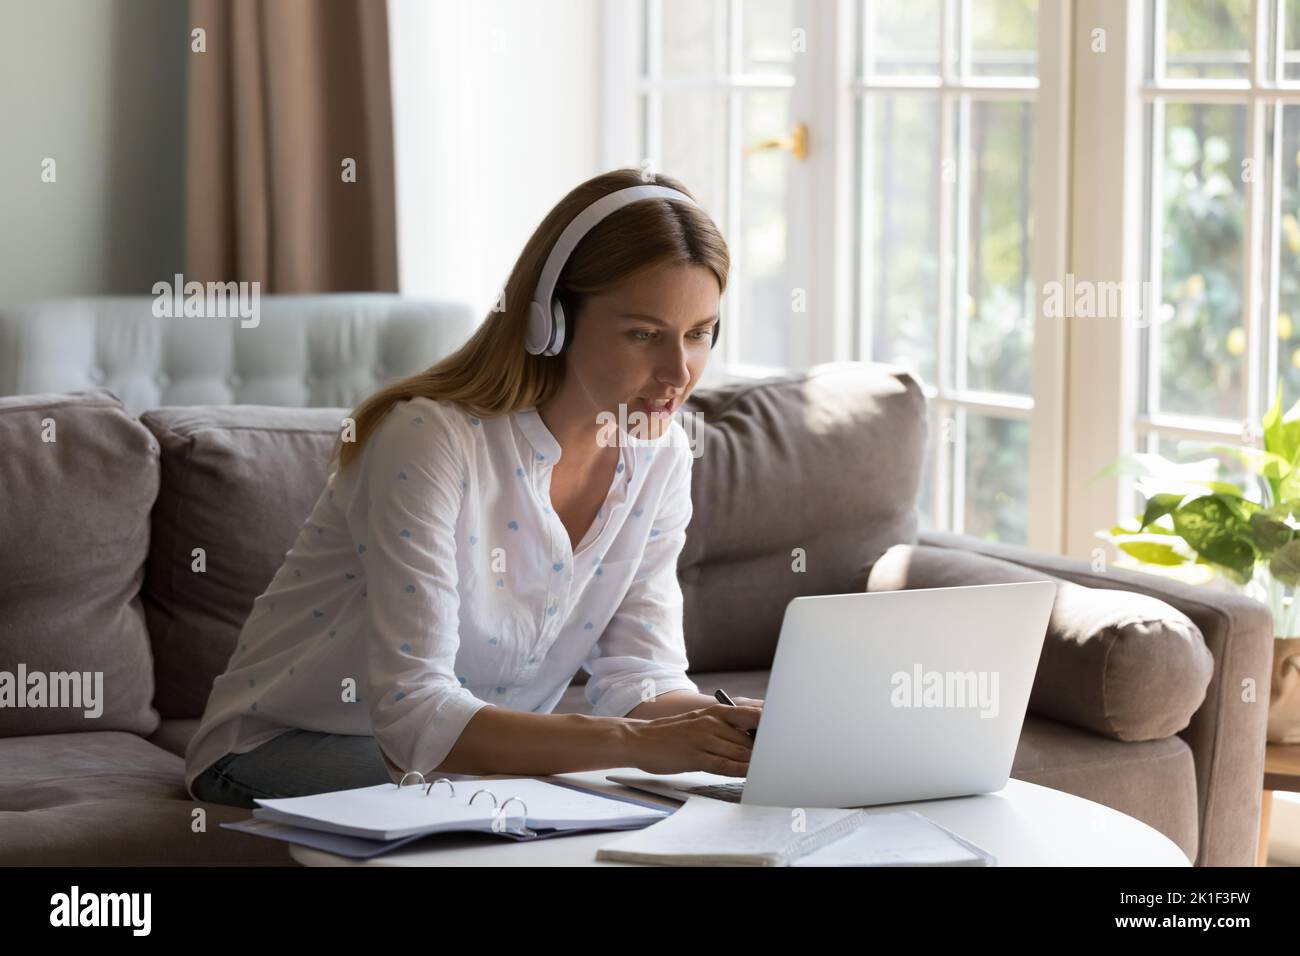 Happy engaged student woman in wireless headset studying from home Stock Photo